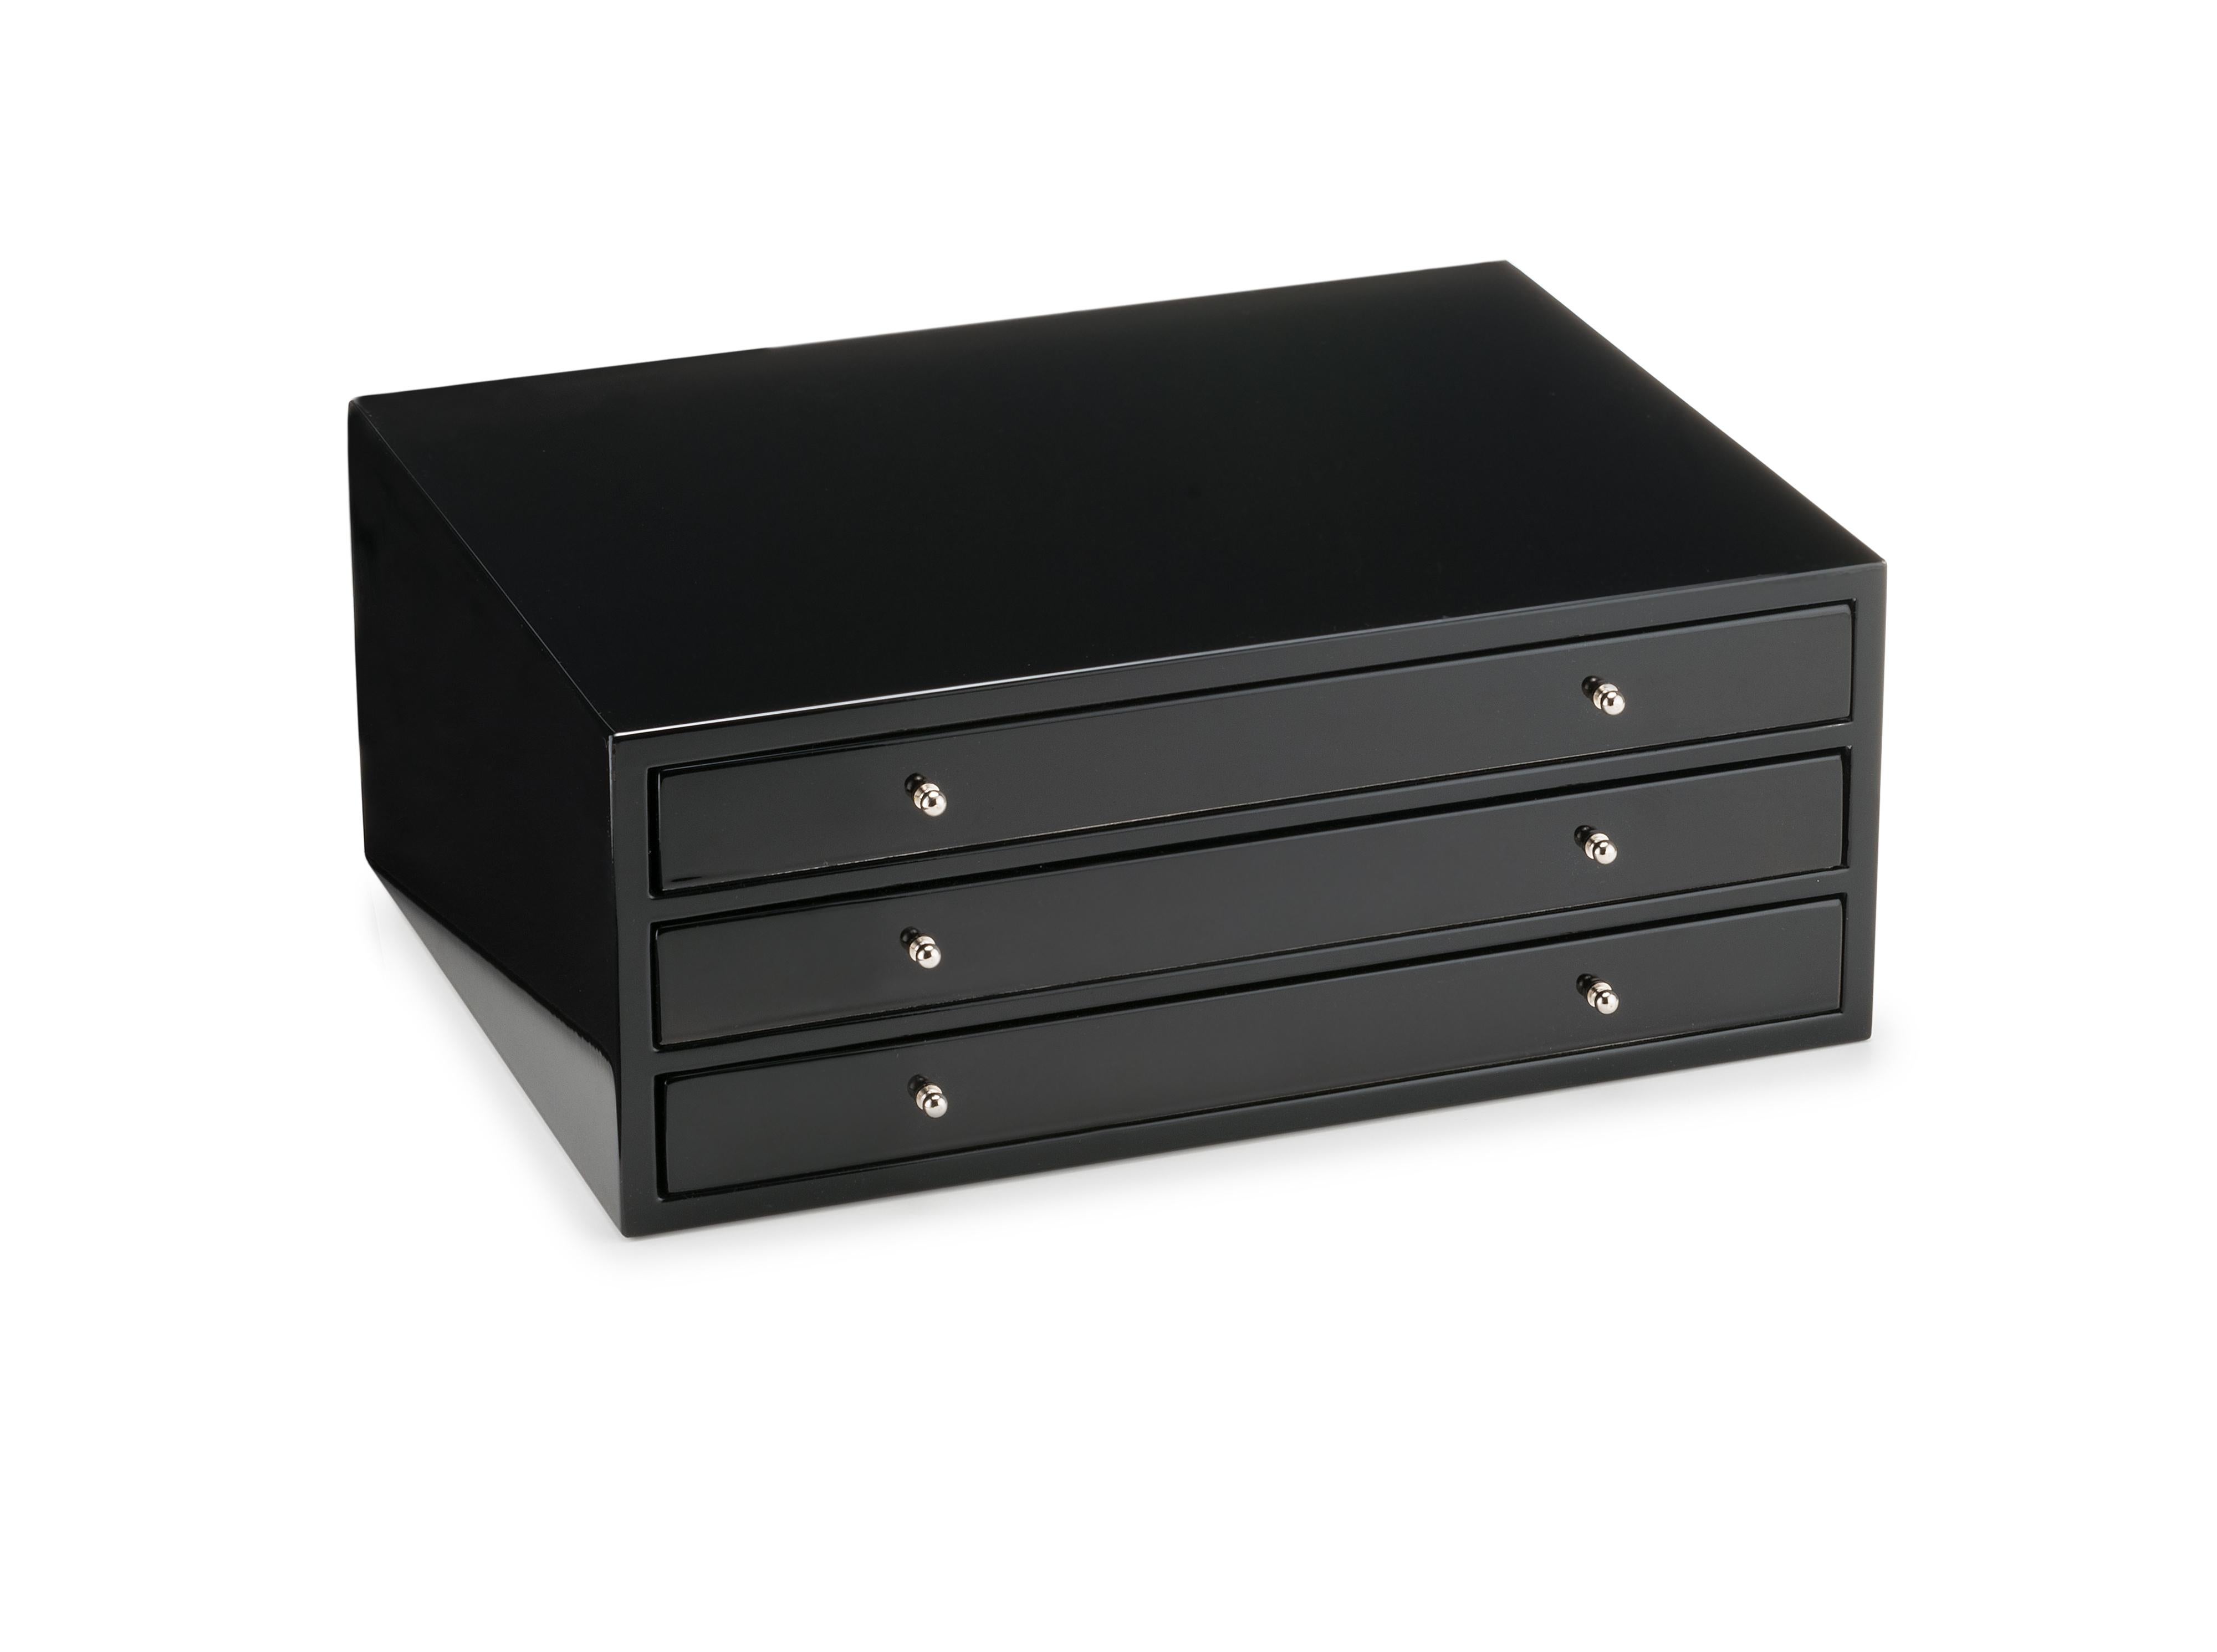 Other Firenze 3 Drawers Black For Sale